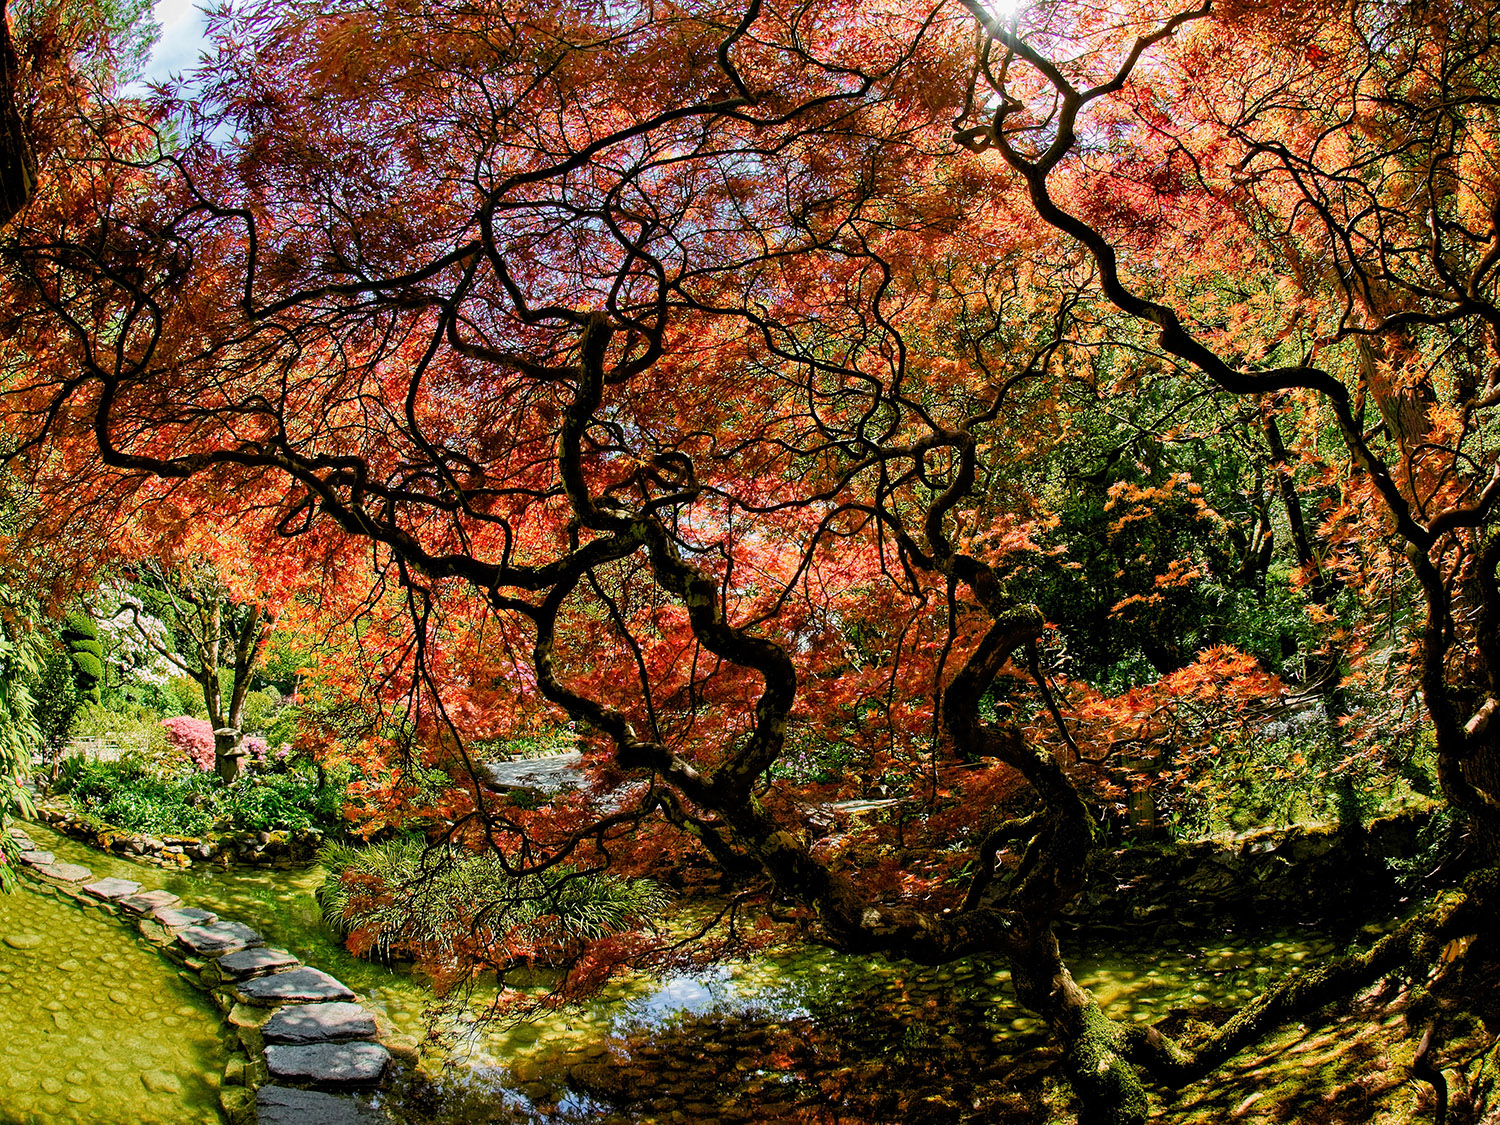 Stepping Stones Path and Colored Leaves